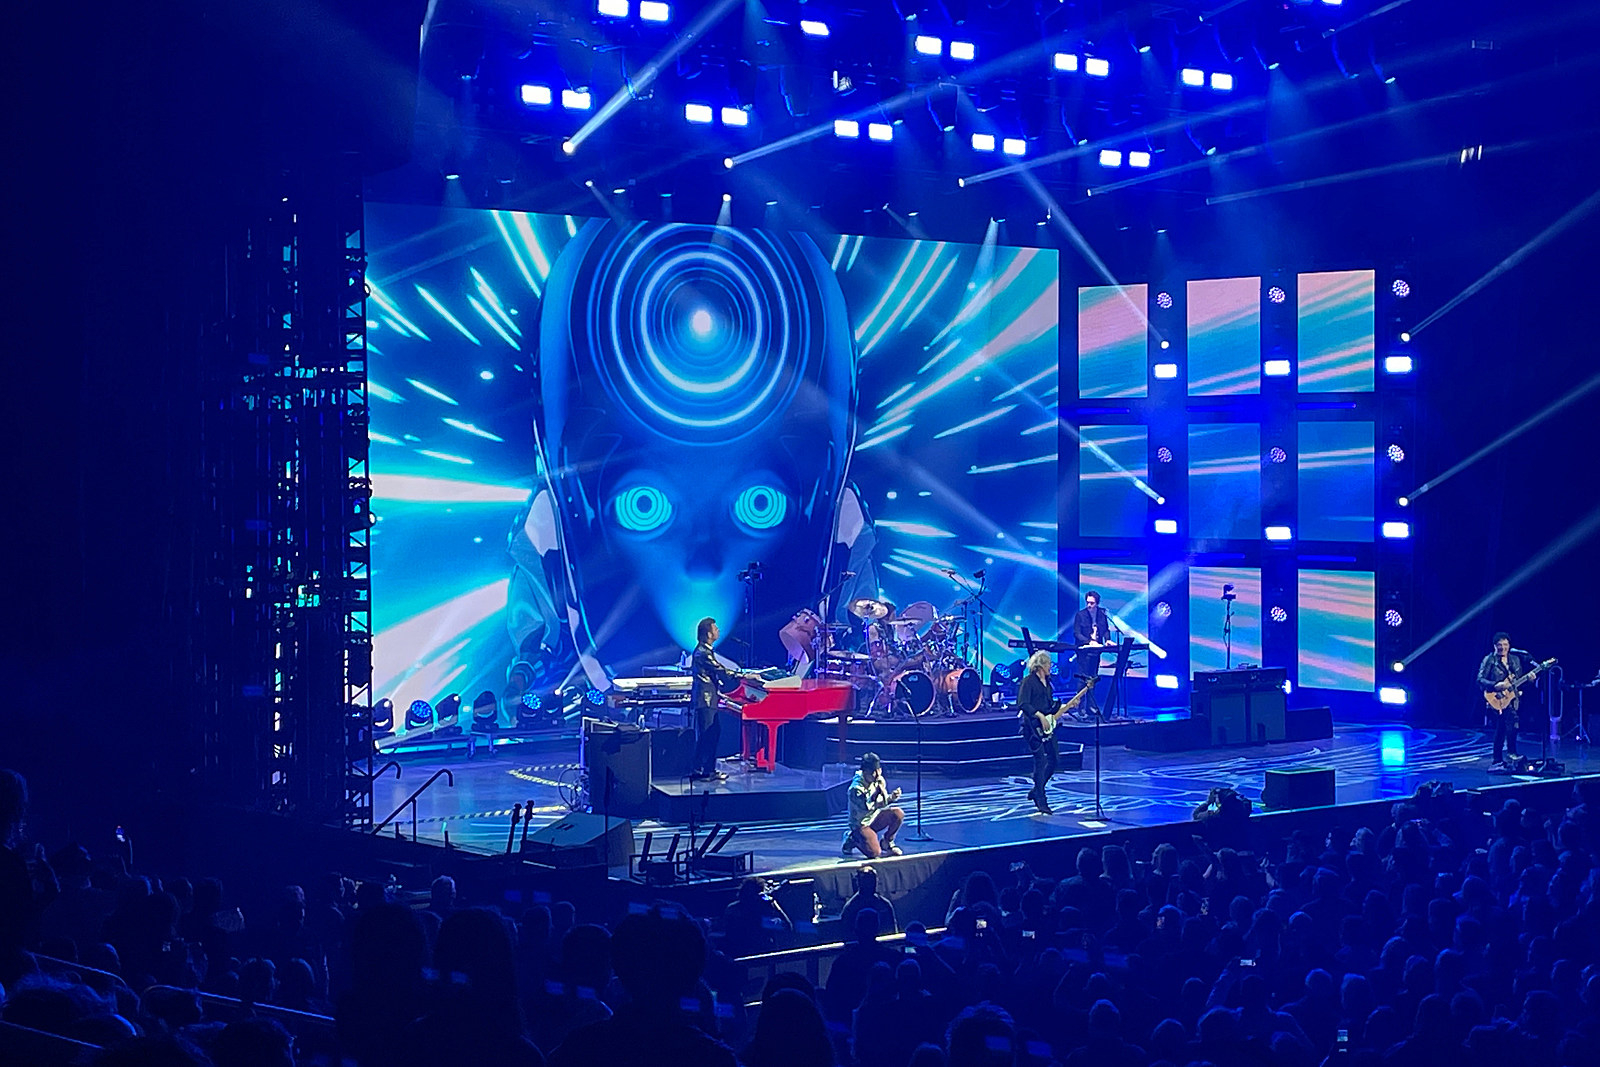 Journey Concert Schedule 2022 Journey And Toto Kick Off 2022 'Freedom' Tour: Set Lists, Videos